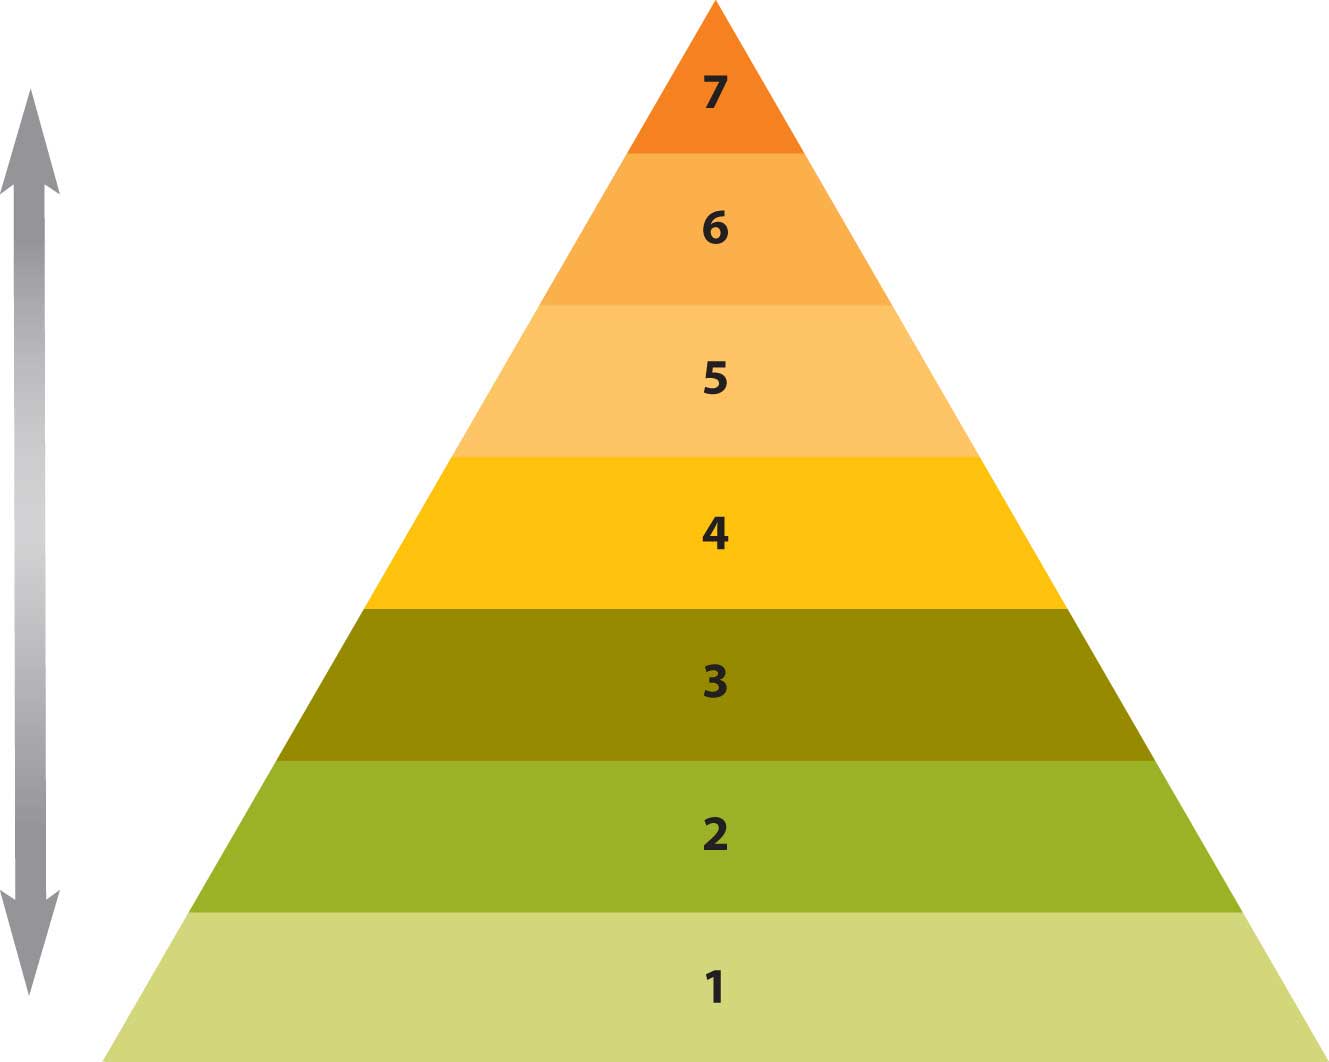 Maslow's Hierarchy of Needs (a triangle with 1 at the bottom, and 7 at the top)